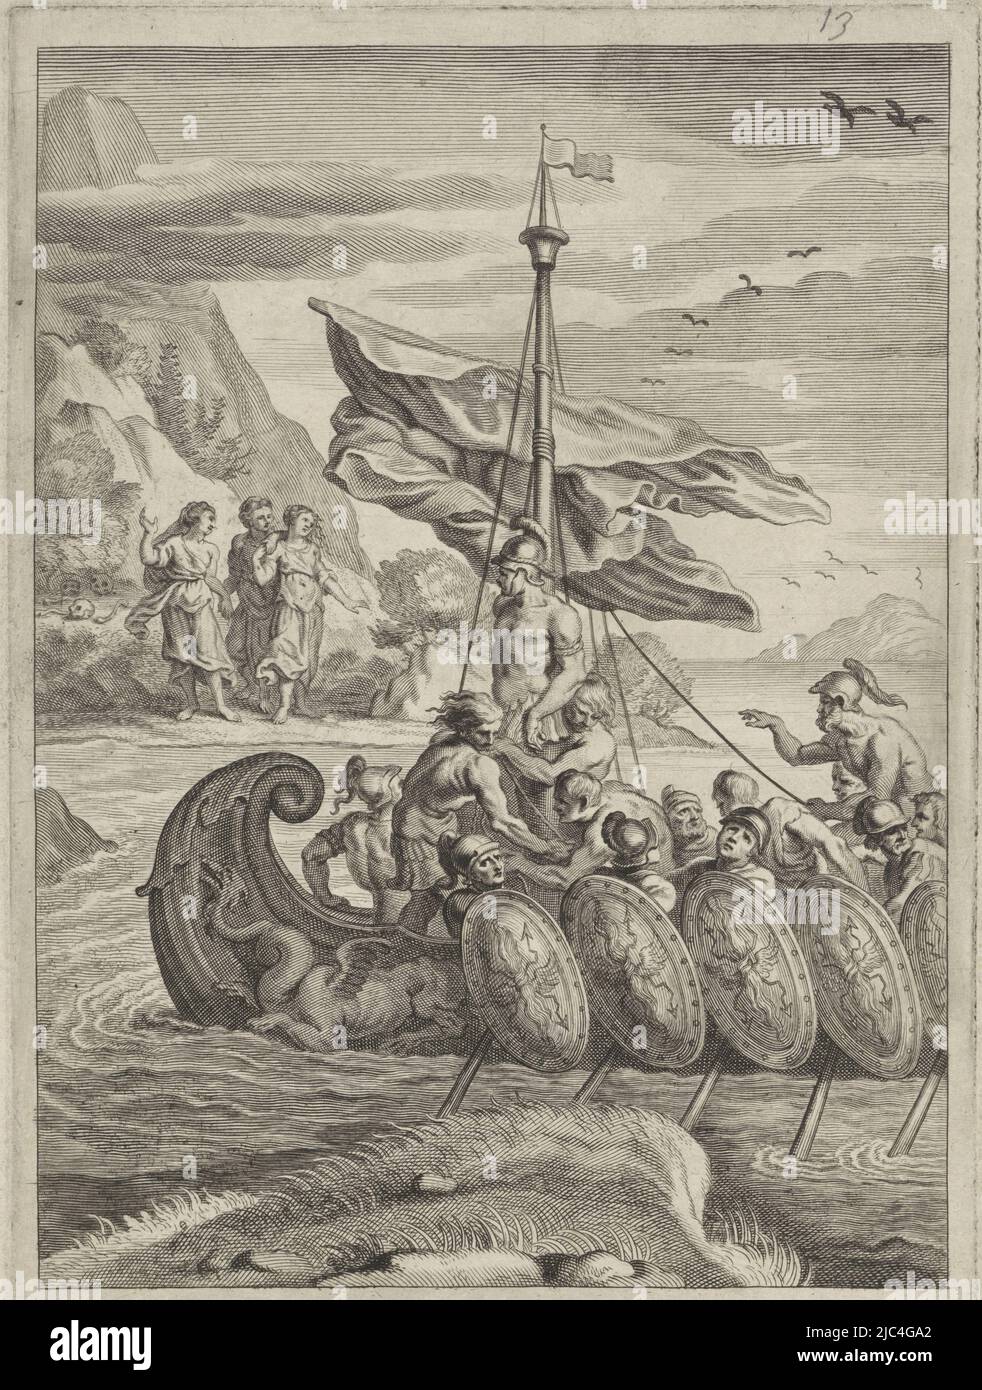 Odysseus is tied by his men to the mast of the ship to withstand the singing of the sirens. The remaining men are rowing. On the shore stand three sirens. Behind them lie the bones of previous victims., Odysseus and the sirens, print maker: anonymous, Abraham van Diepenbeeck, print maker: Low Countries, Southern Netherlands, 1622 - 1725, paper, engraving, h 289 mm × w 198 mm Stock Photo